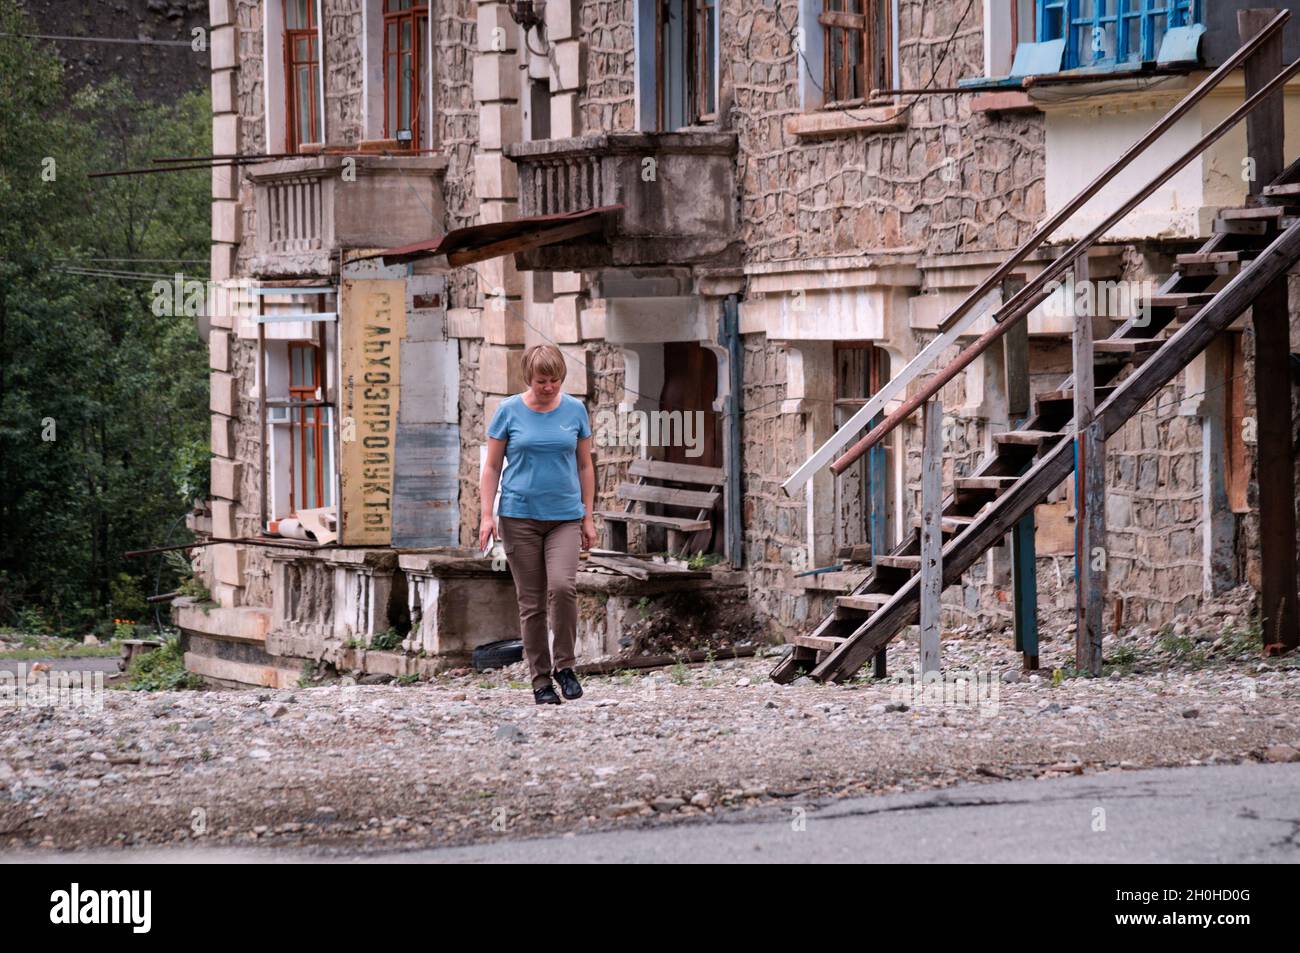 SADON, RUSSIA - 07 25 2021: Lonely stranger hesitating to step further on desolated territory beside old abandoned partially collapsed building with Stock Photo